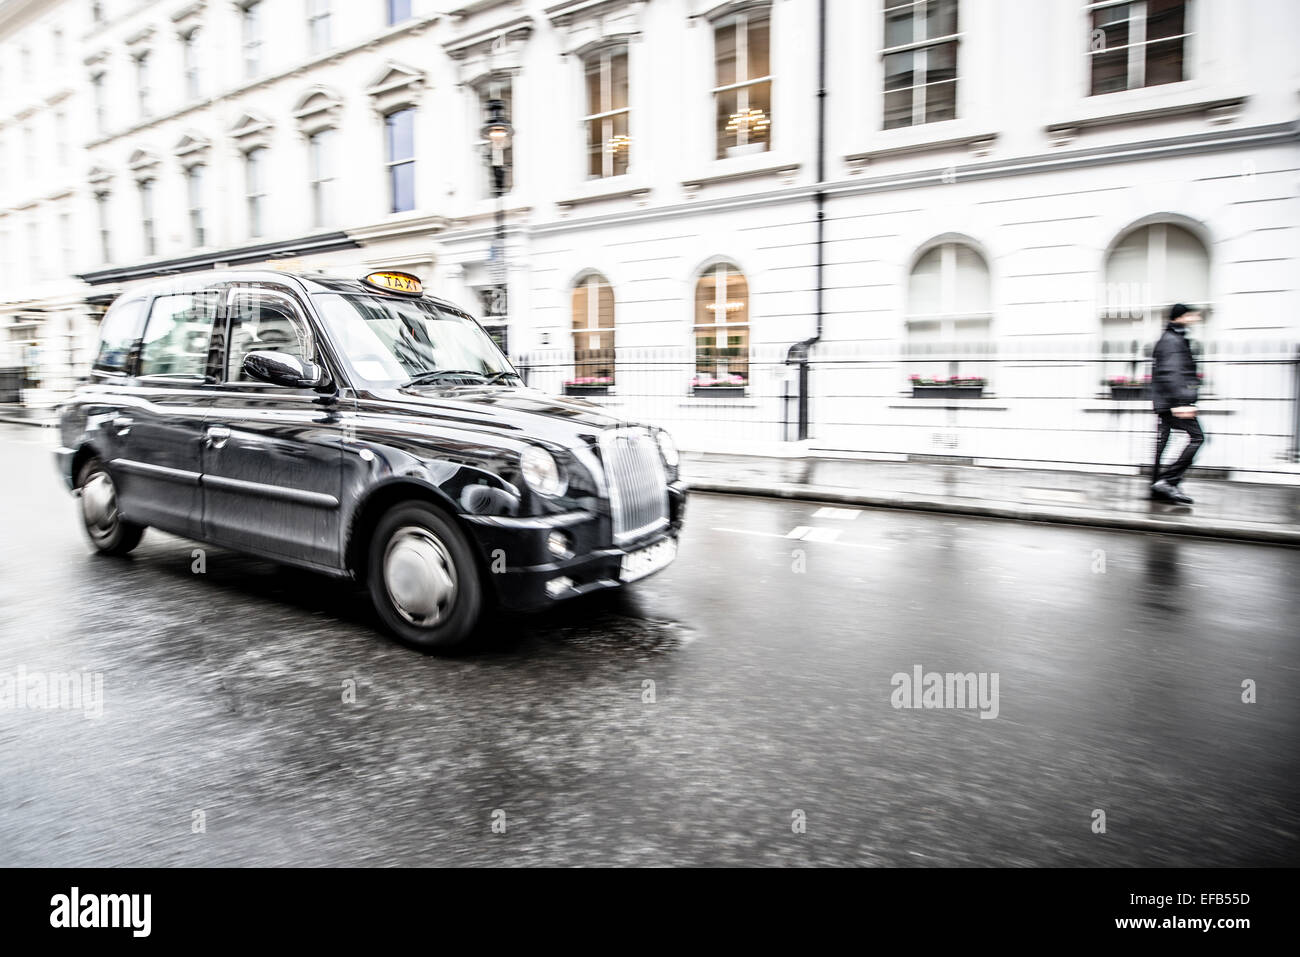 Black taxi cab on London streets Stock Photo